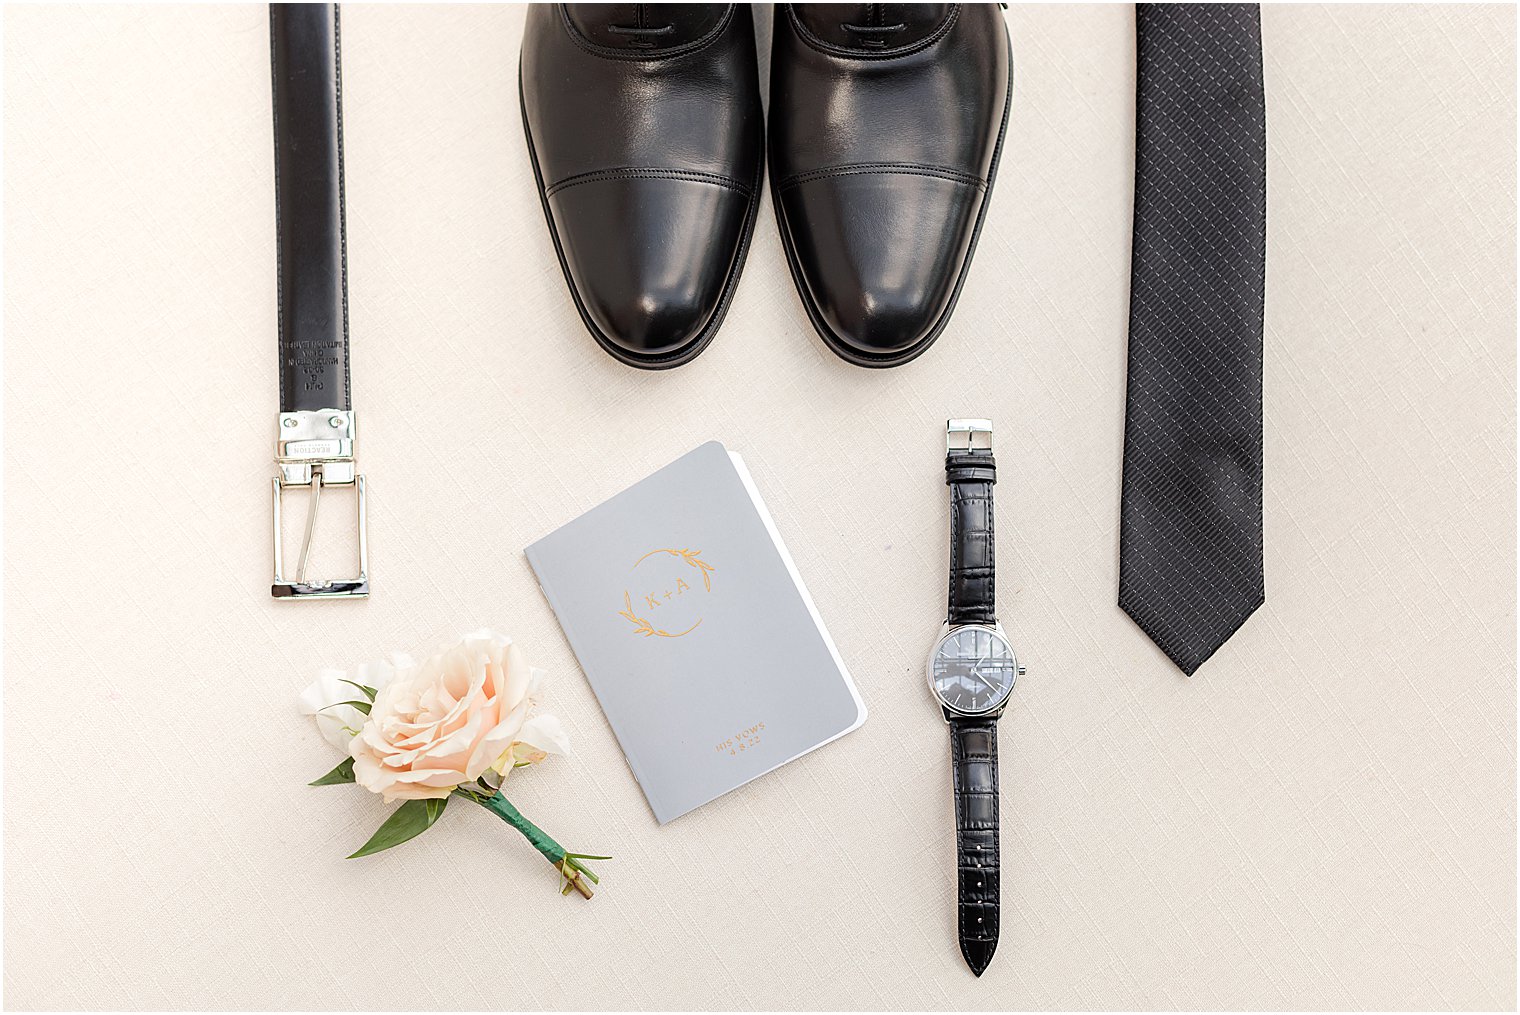 groom's shoes, watch, and boutonnière for NJ wedding